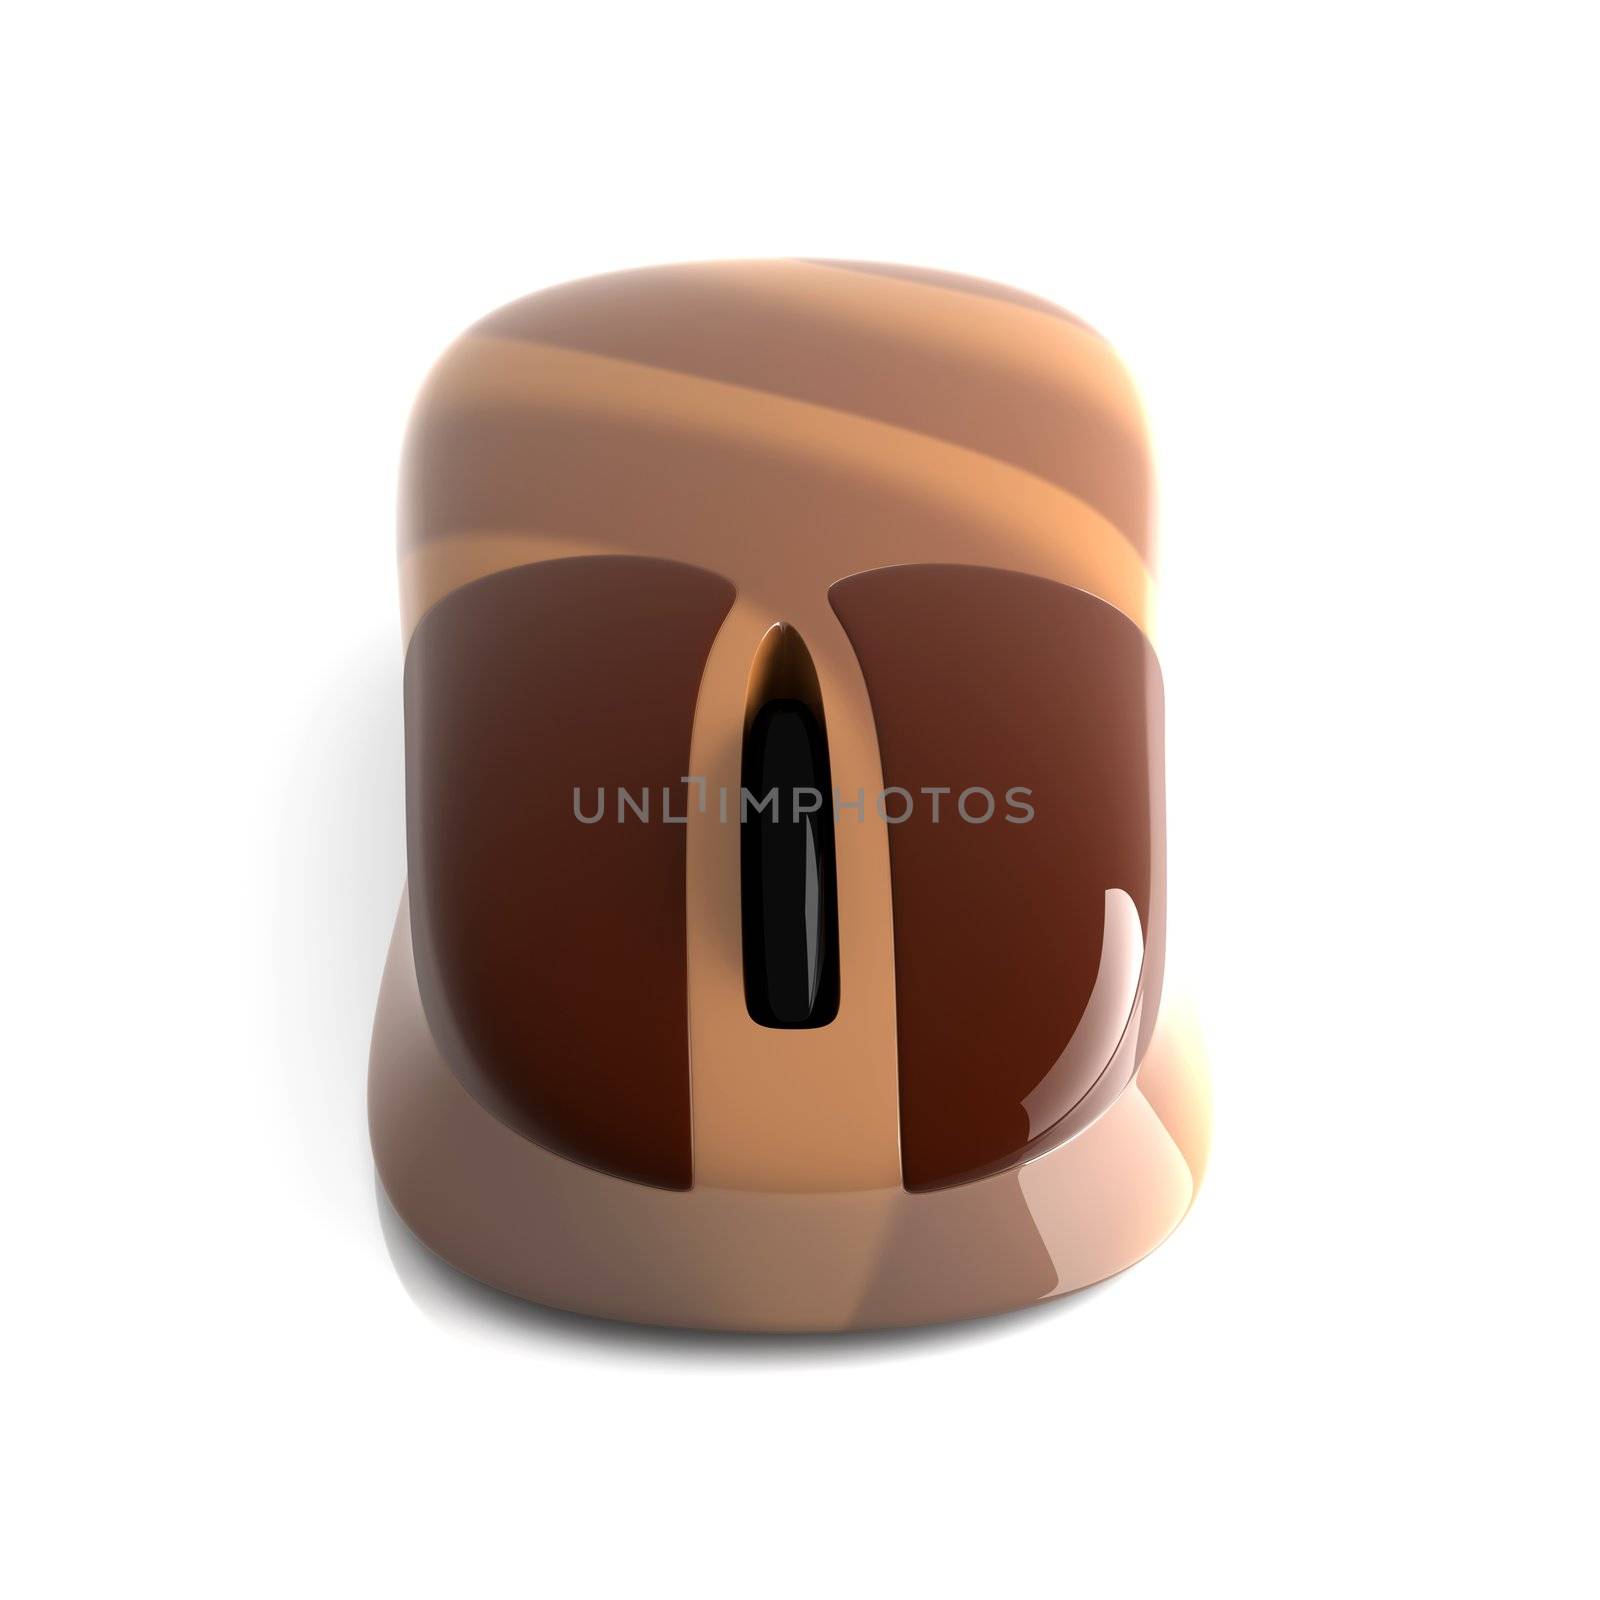 3D Illustration. Chocolate / coffee textured Mouse. Isolated on white.
